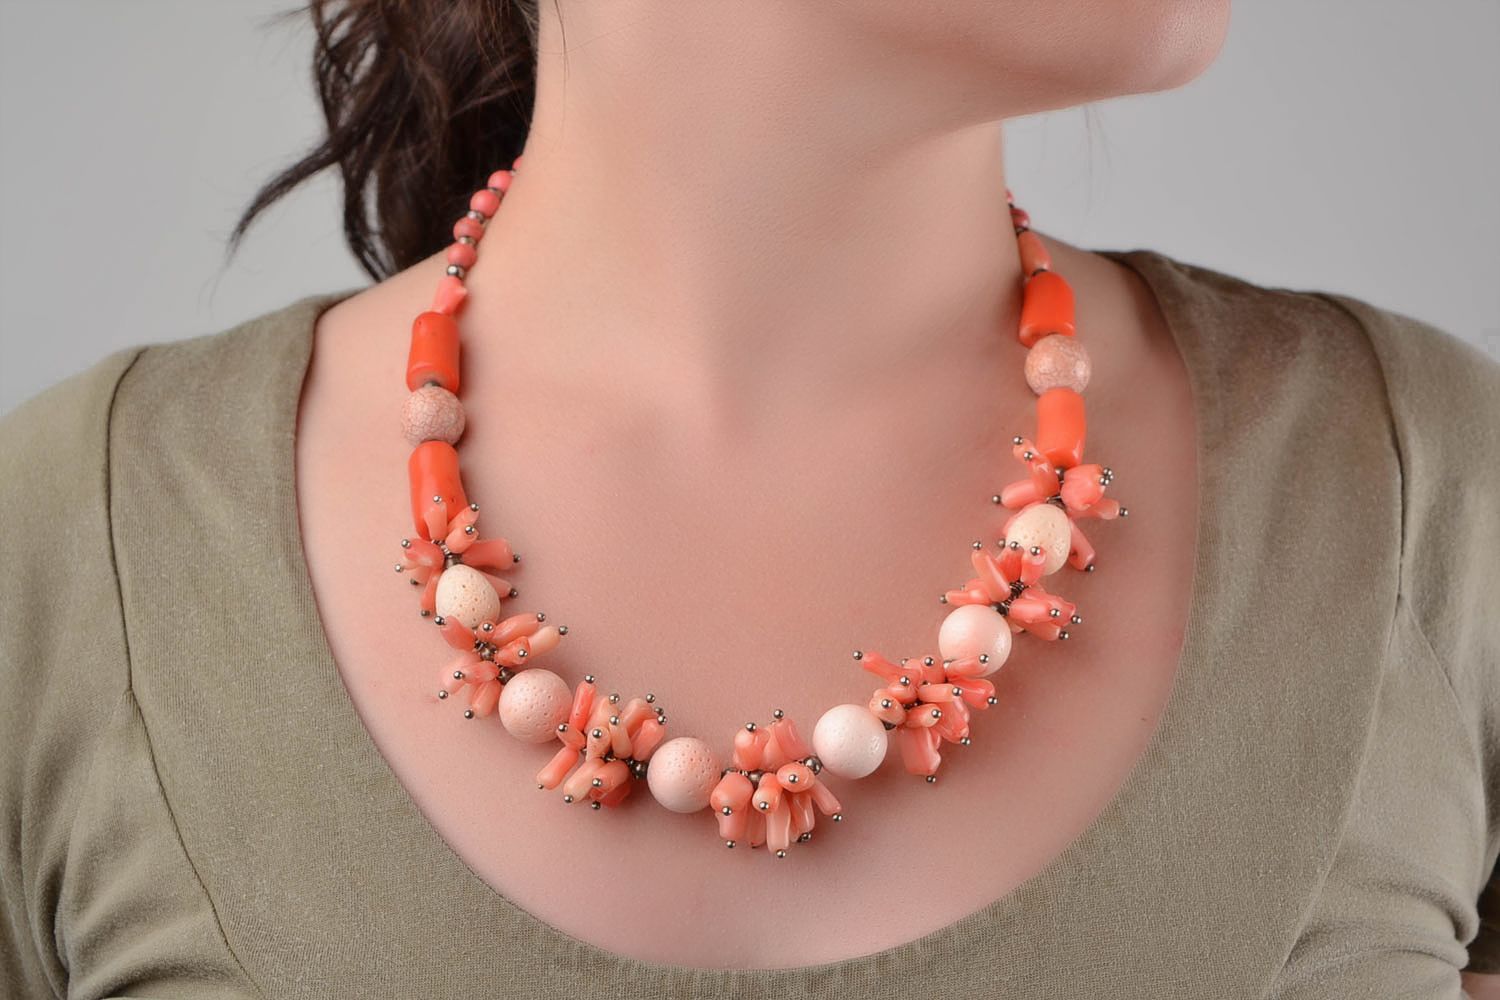 Necklace made of beads and natural stones pink delicate handmade accessory photo 1